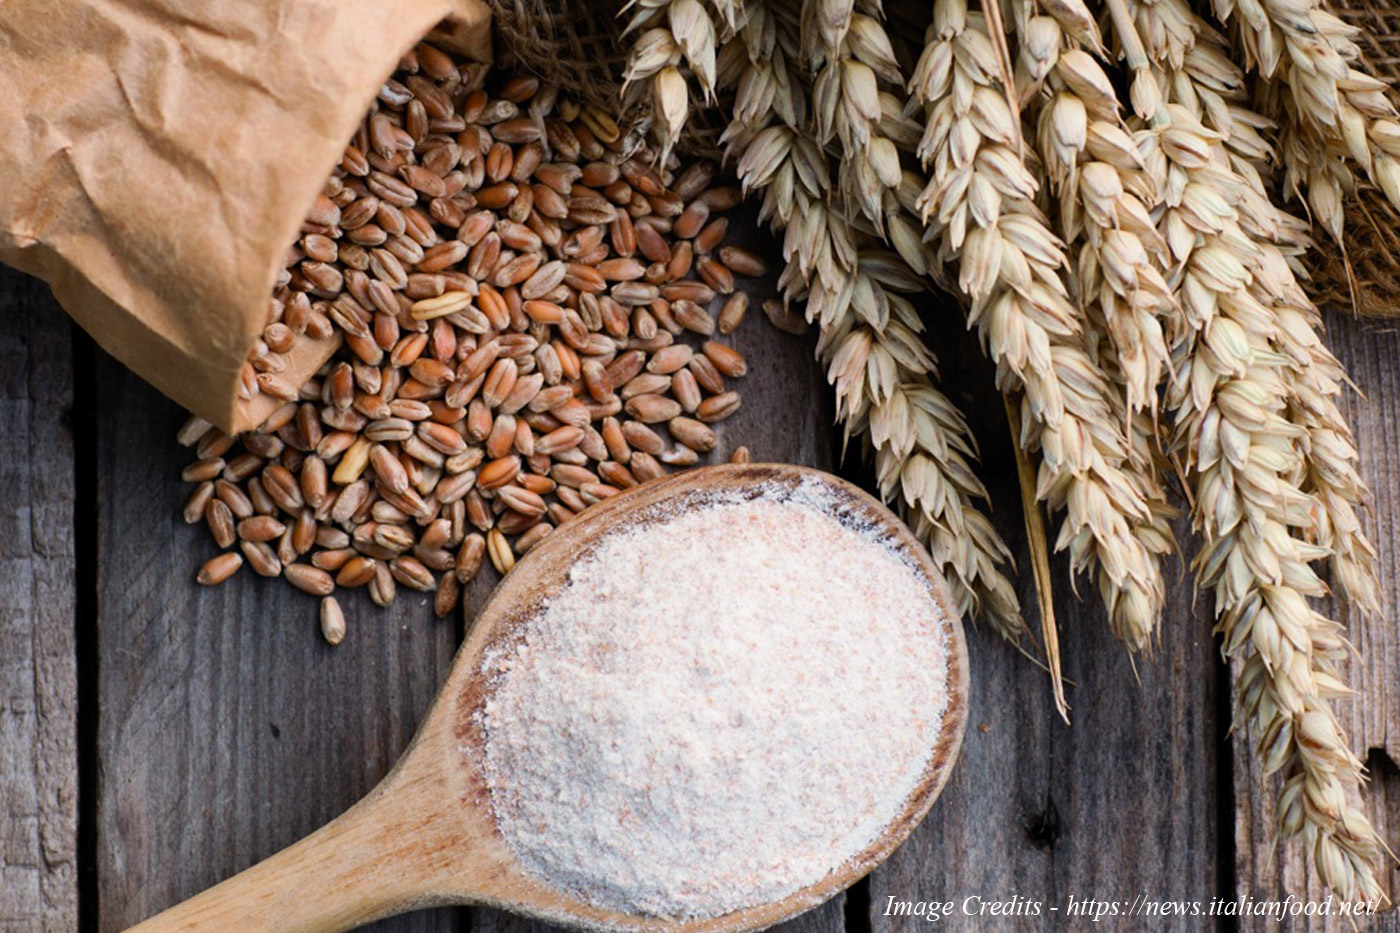 Durum Wheat – A Boost of Nutrients in Processed Food